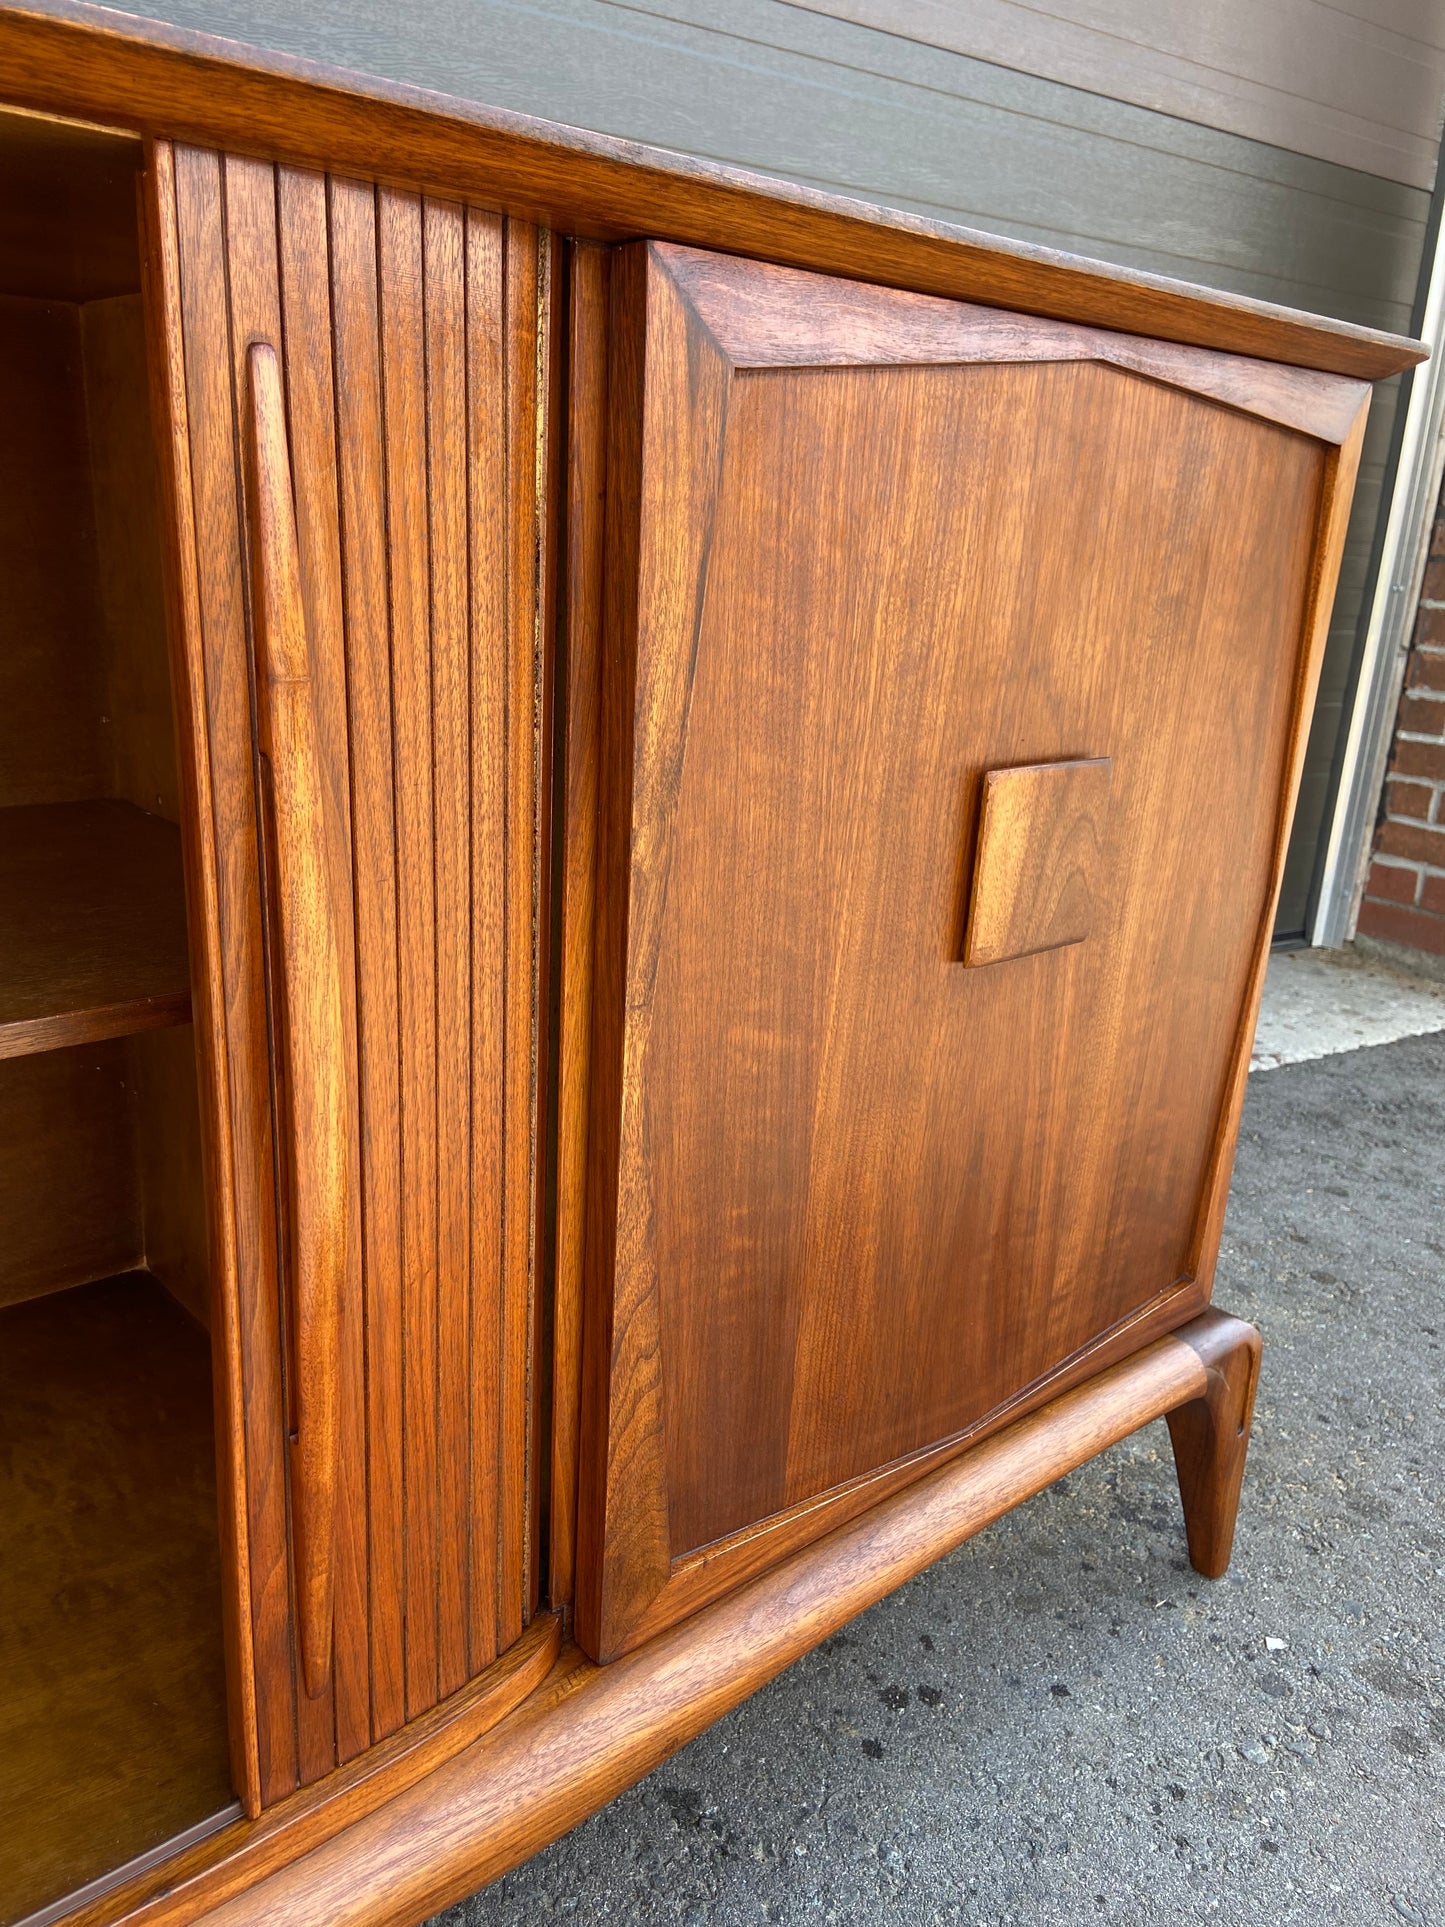 REFINISHED Mid Century Modern Walnut Credenza with Tambour doors, 8 ft